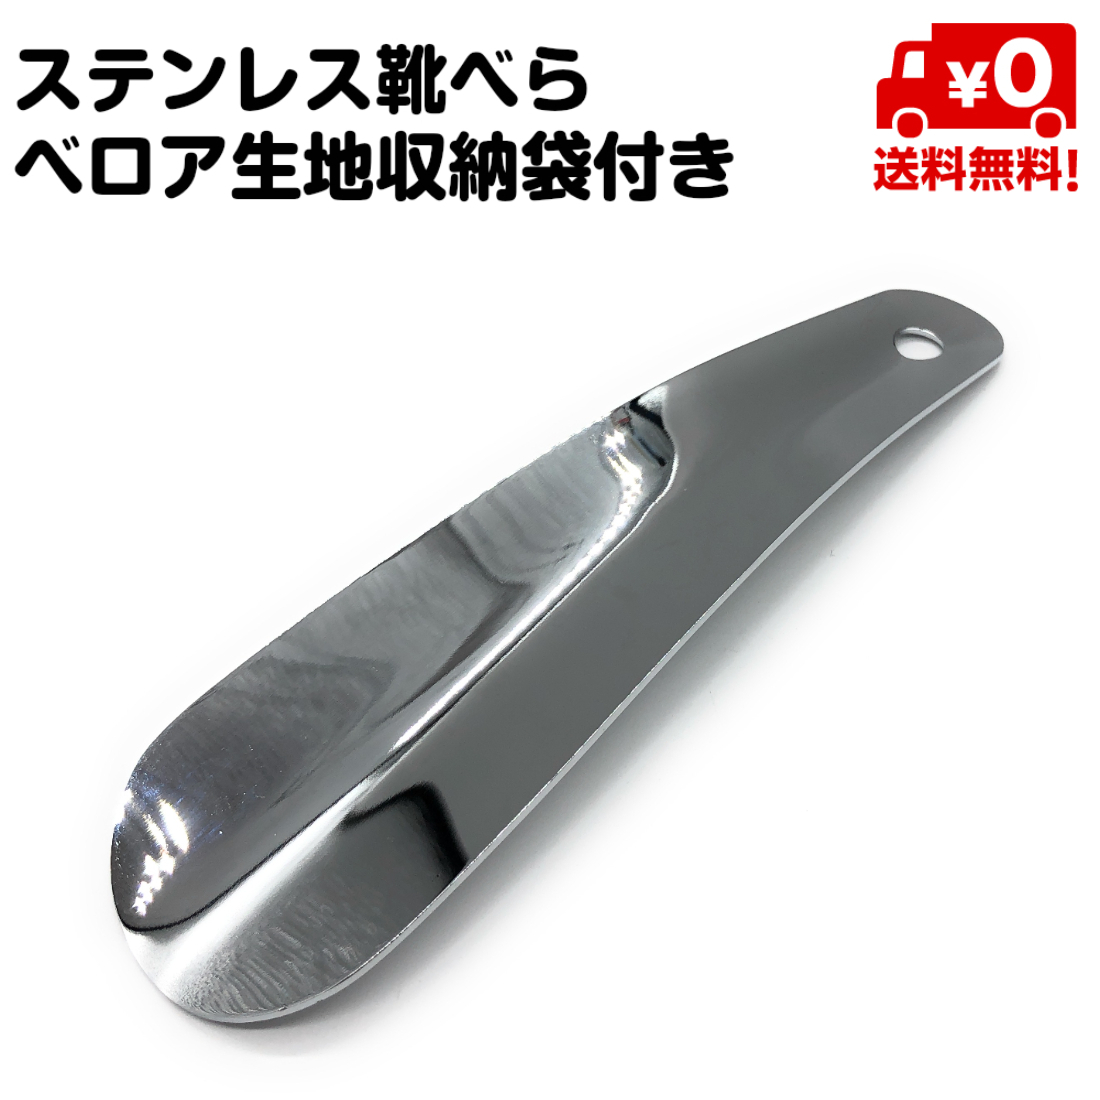  mobile shoehorn plain silver key holder metal stainless steel stylish small size total length 16 centimeter carrying free shipping 